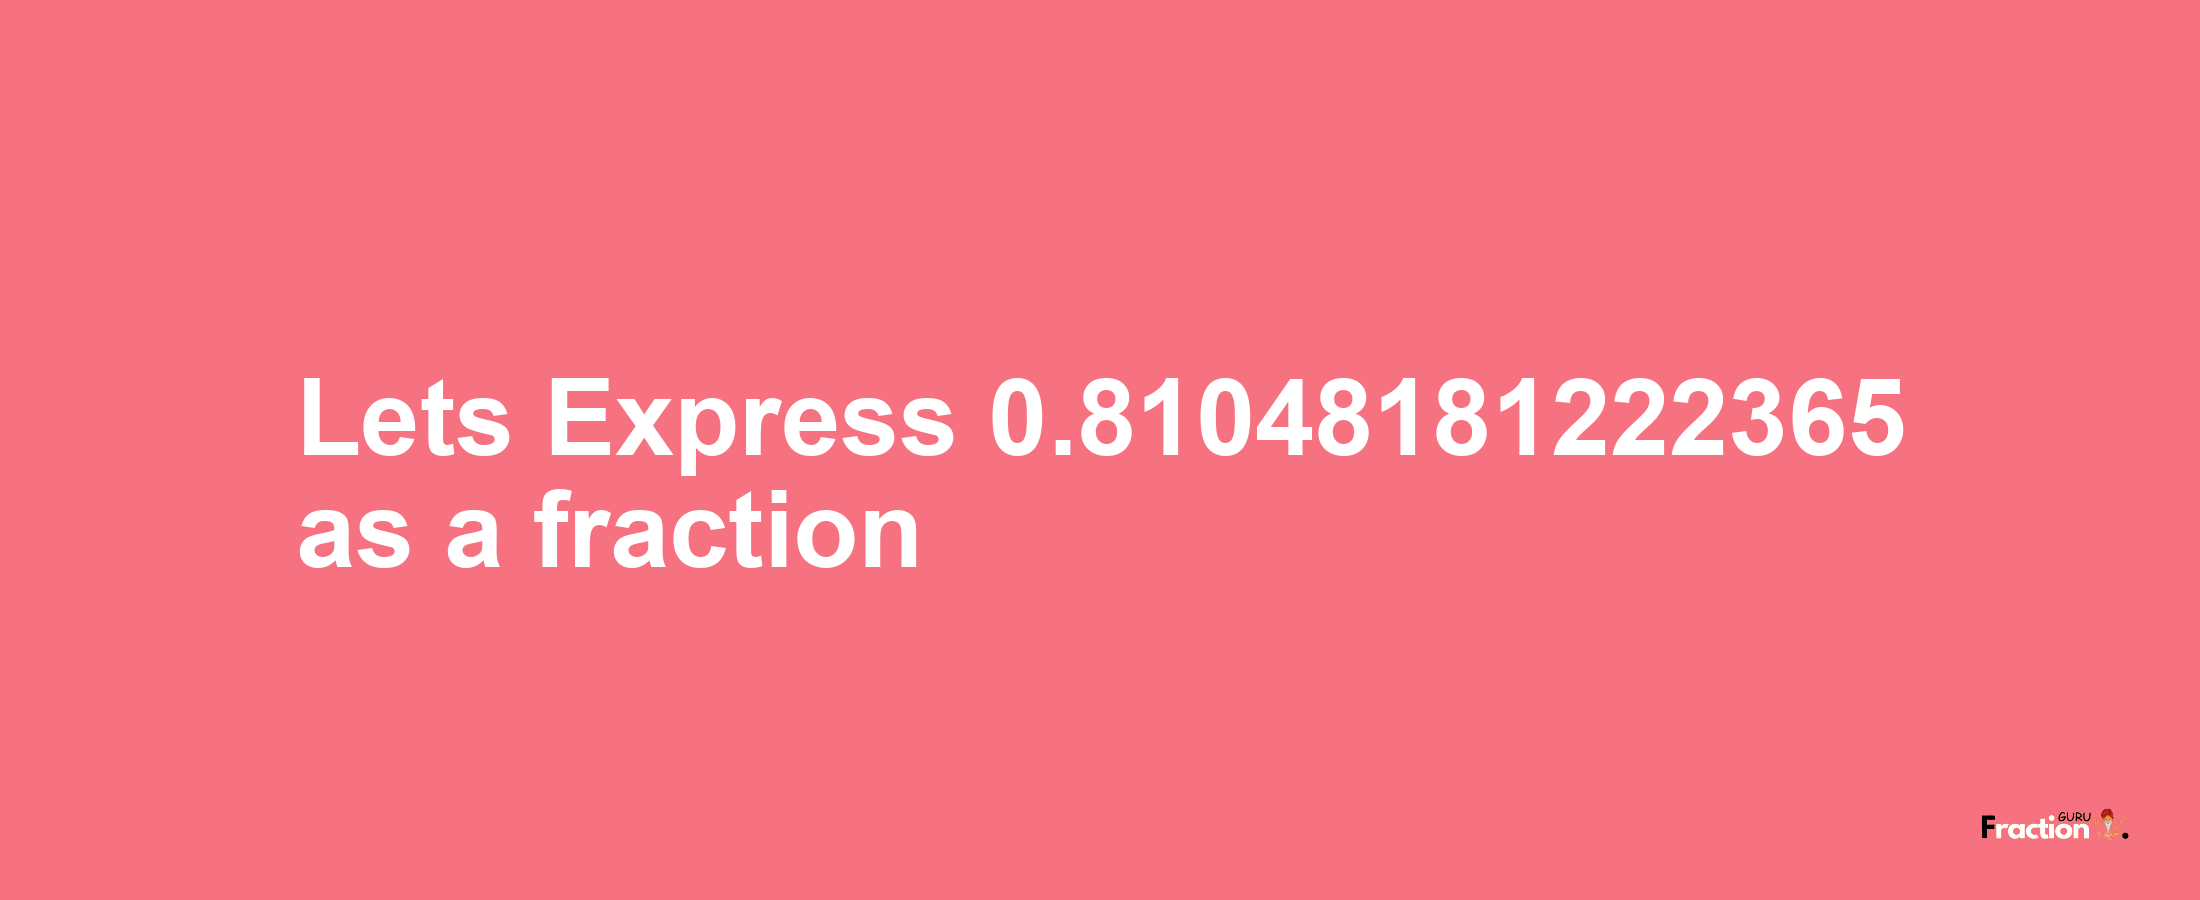 Lets Express 0.81048181222365 as afraction